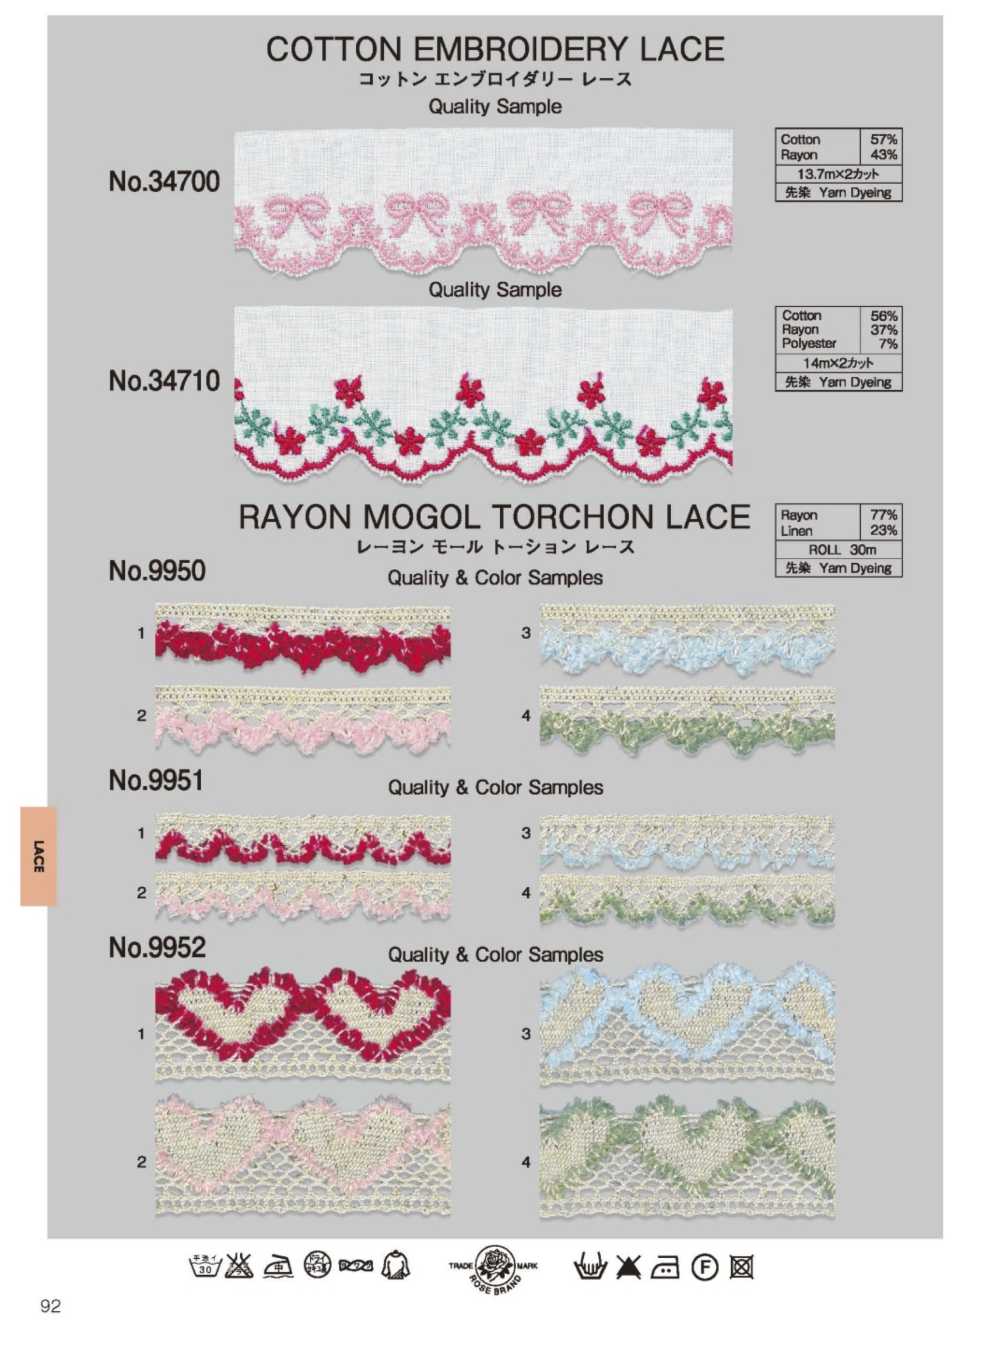 34700 Cotton Embroidered Lace ROSE BRAND (Marushin)